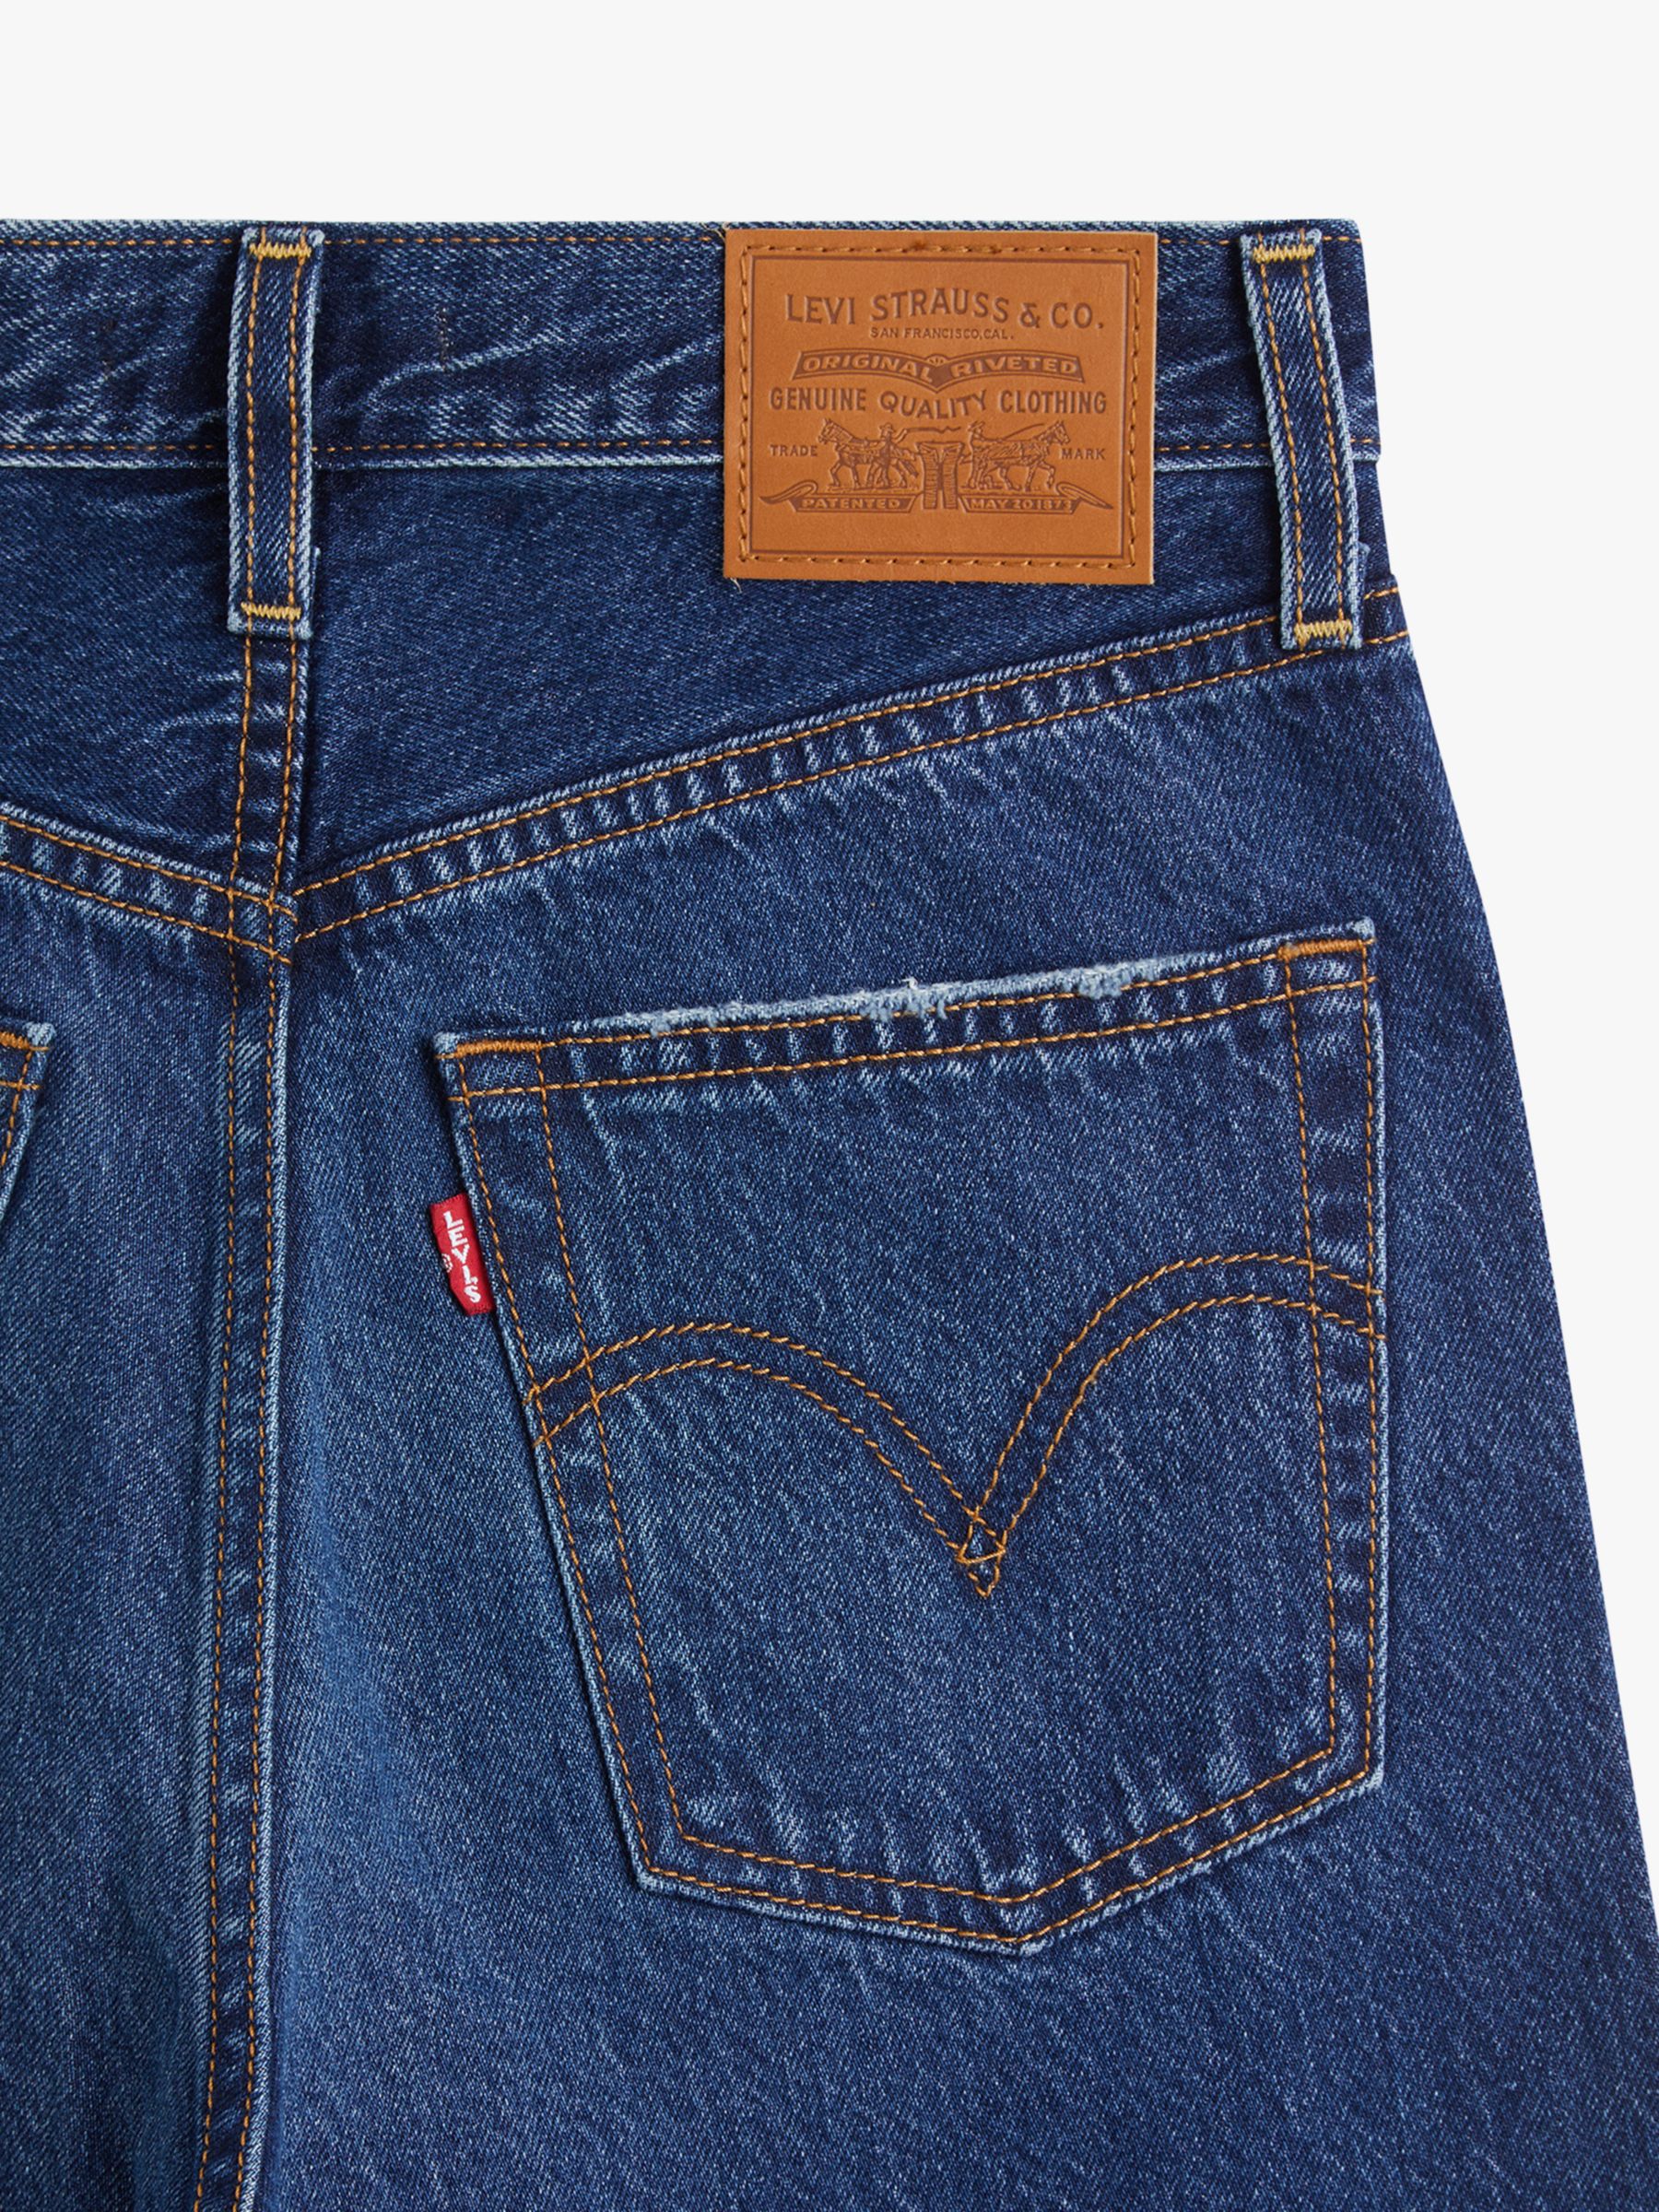 Levi's Ribcage Straight Ankle Jeans, Noe Down at John Lewis & Partners